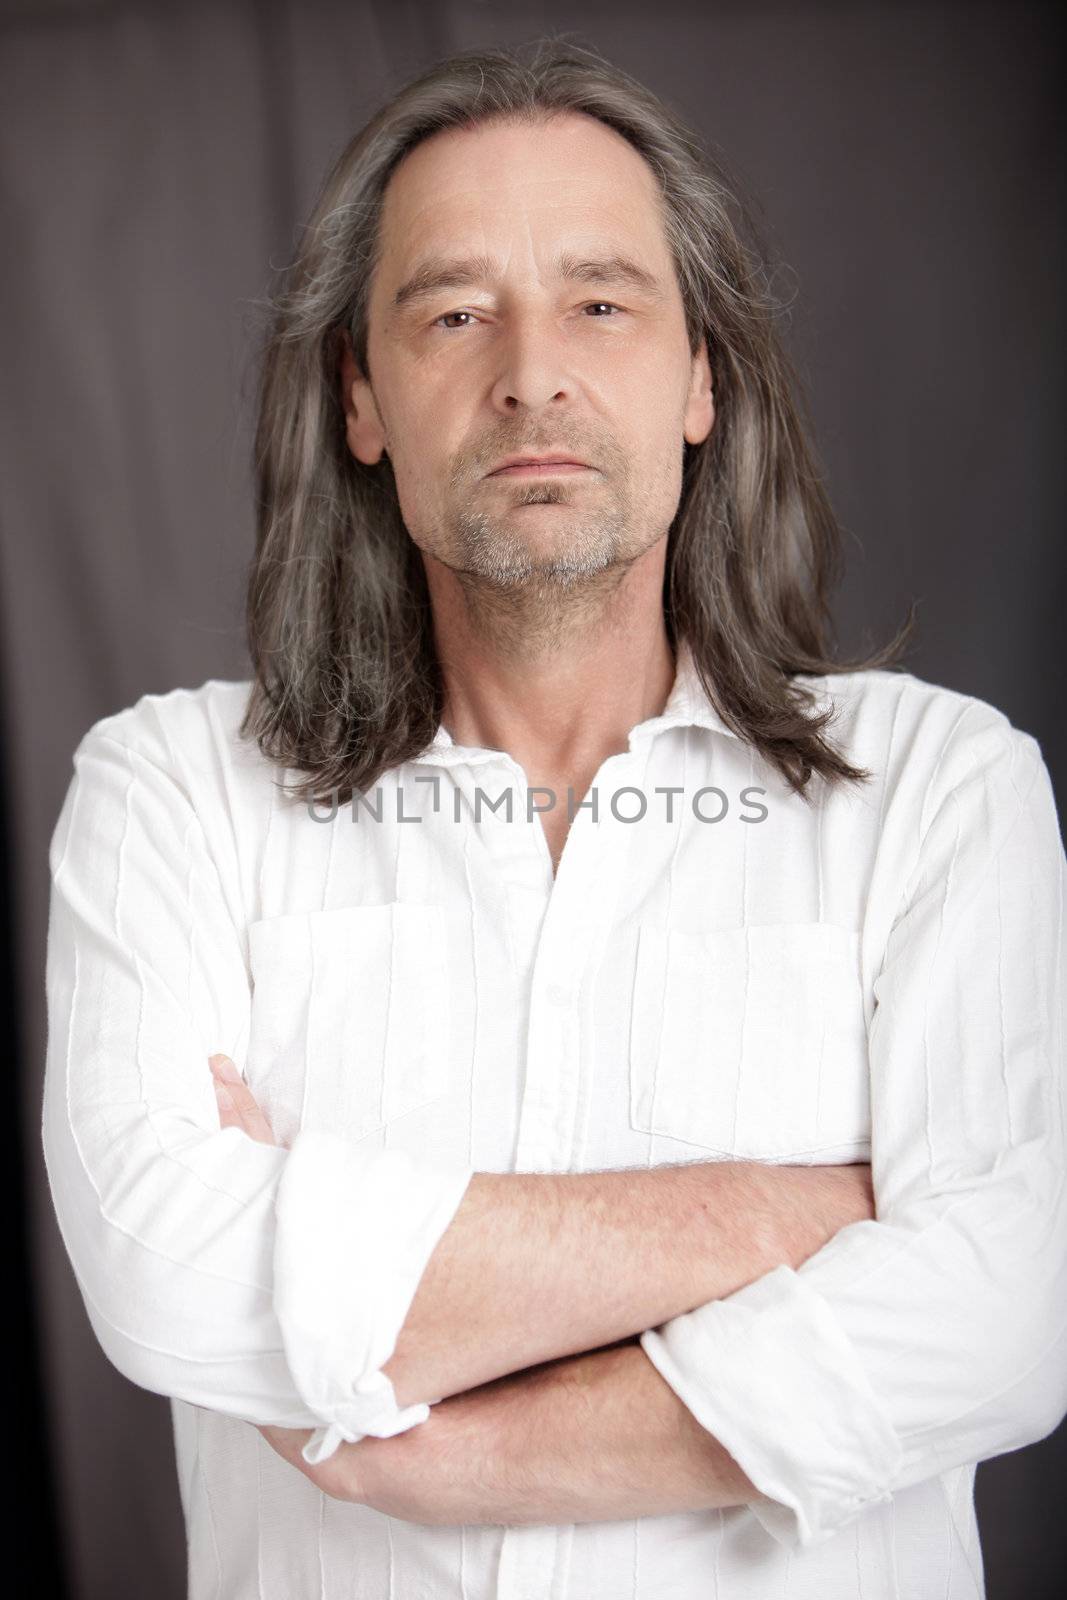 Serious man with shoulder length hair by Farina6000